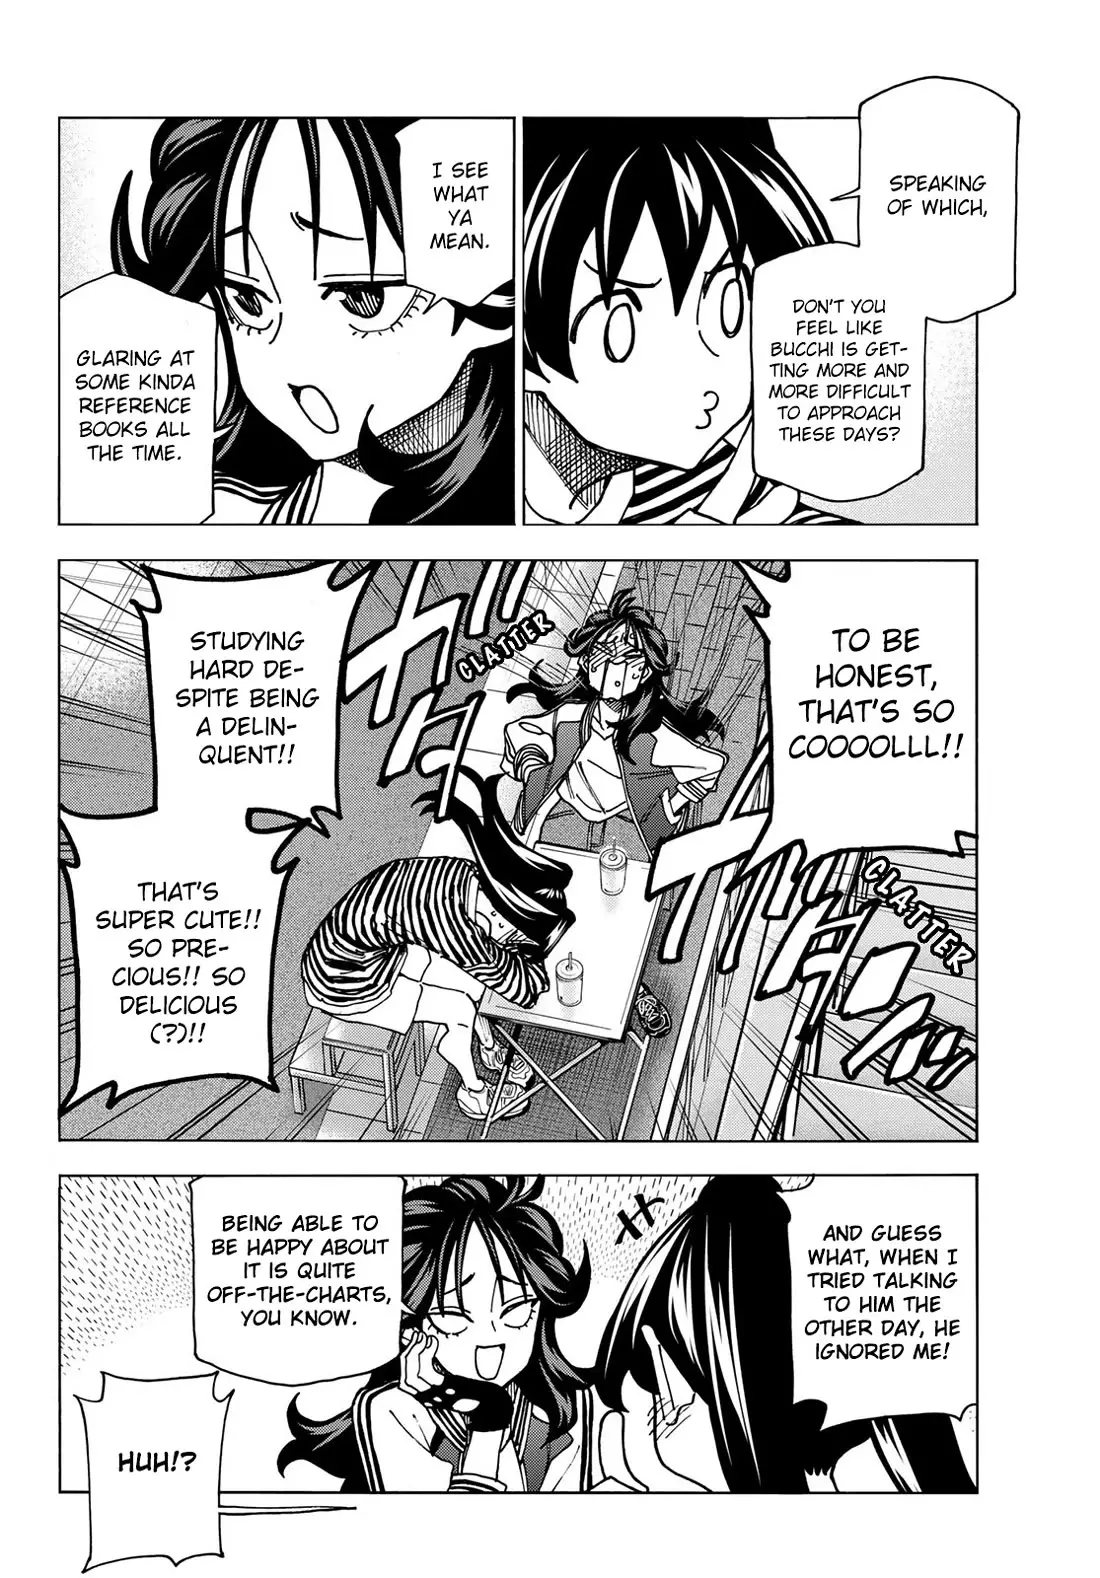 The Story Between A Dumb Prefect And A High School Girl With An Inappropriate Skirt Length - 67 page 2-e1e7d693